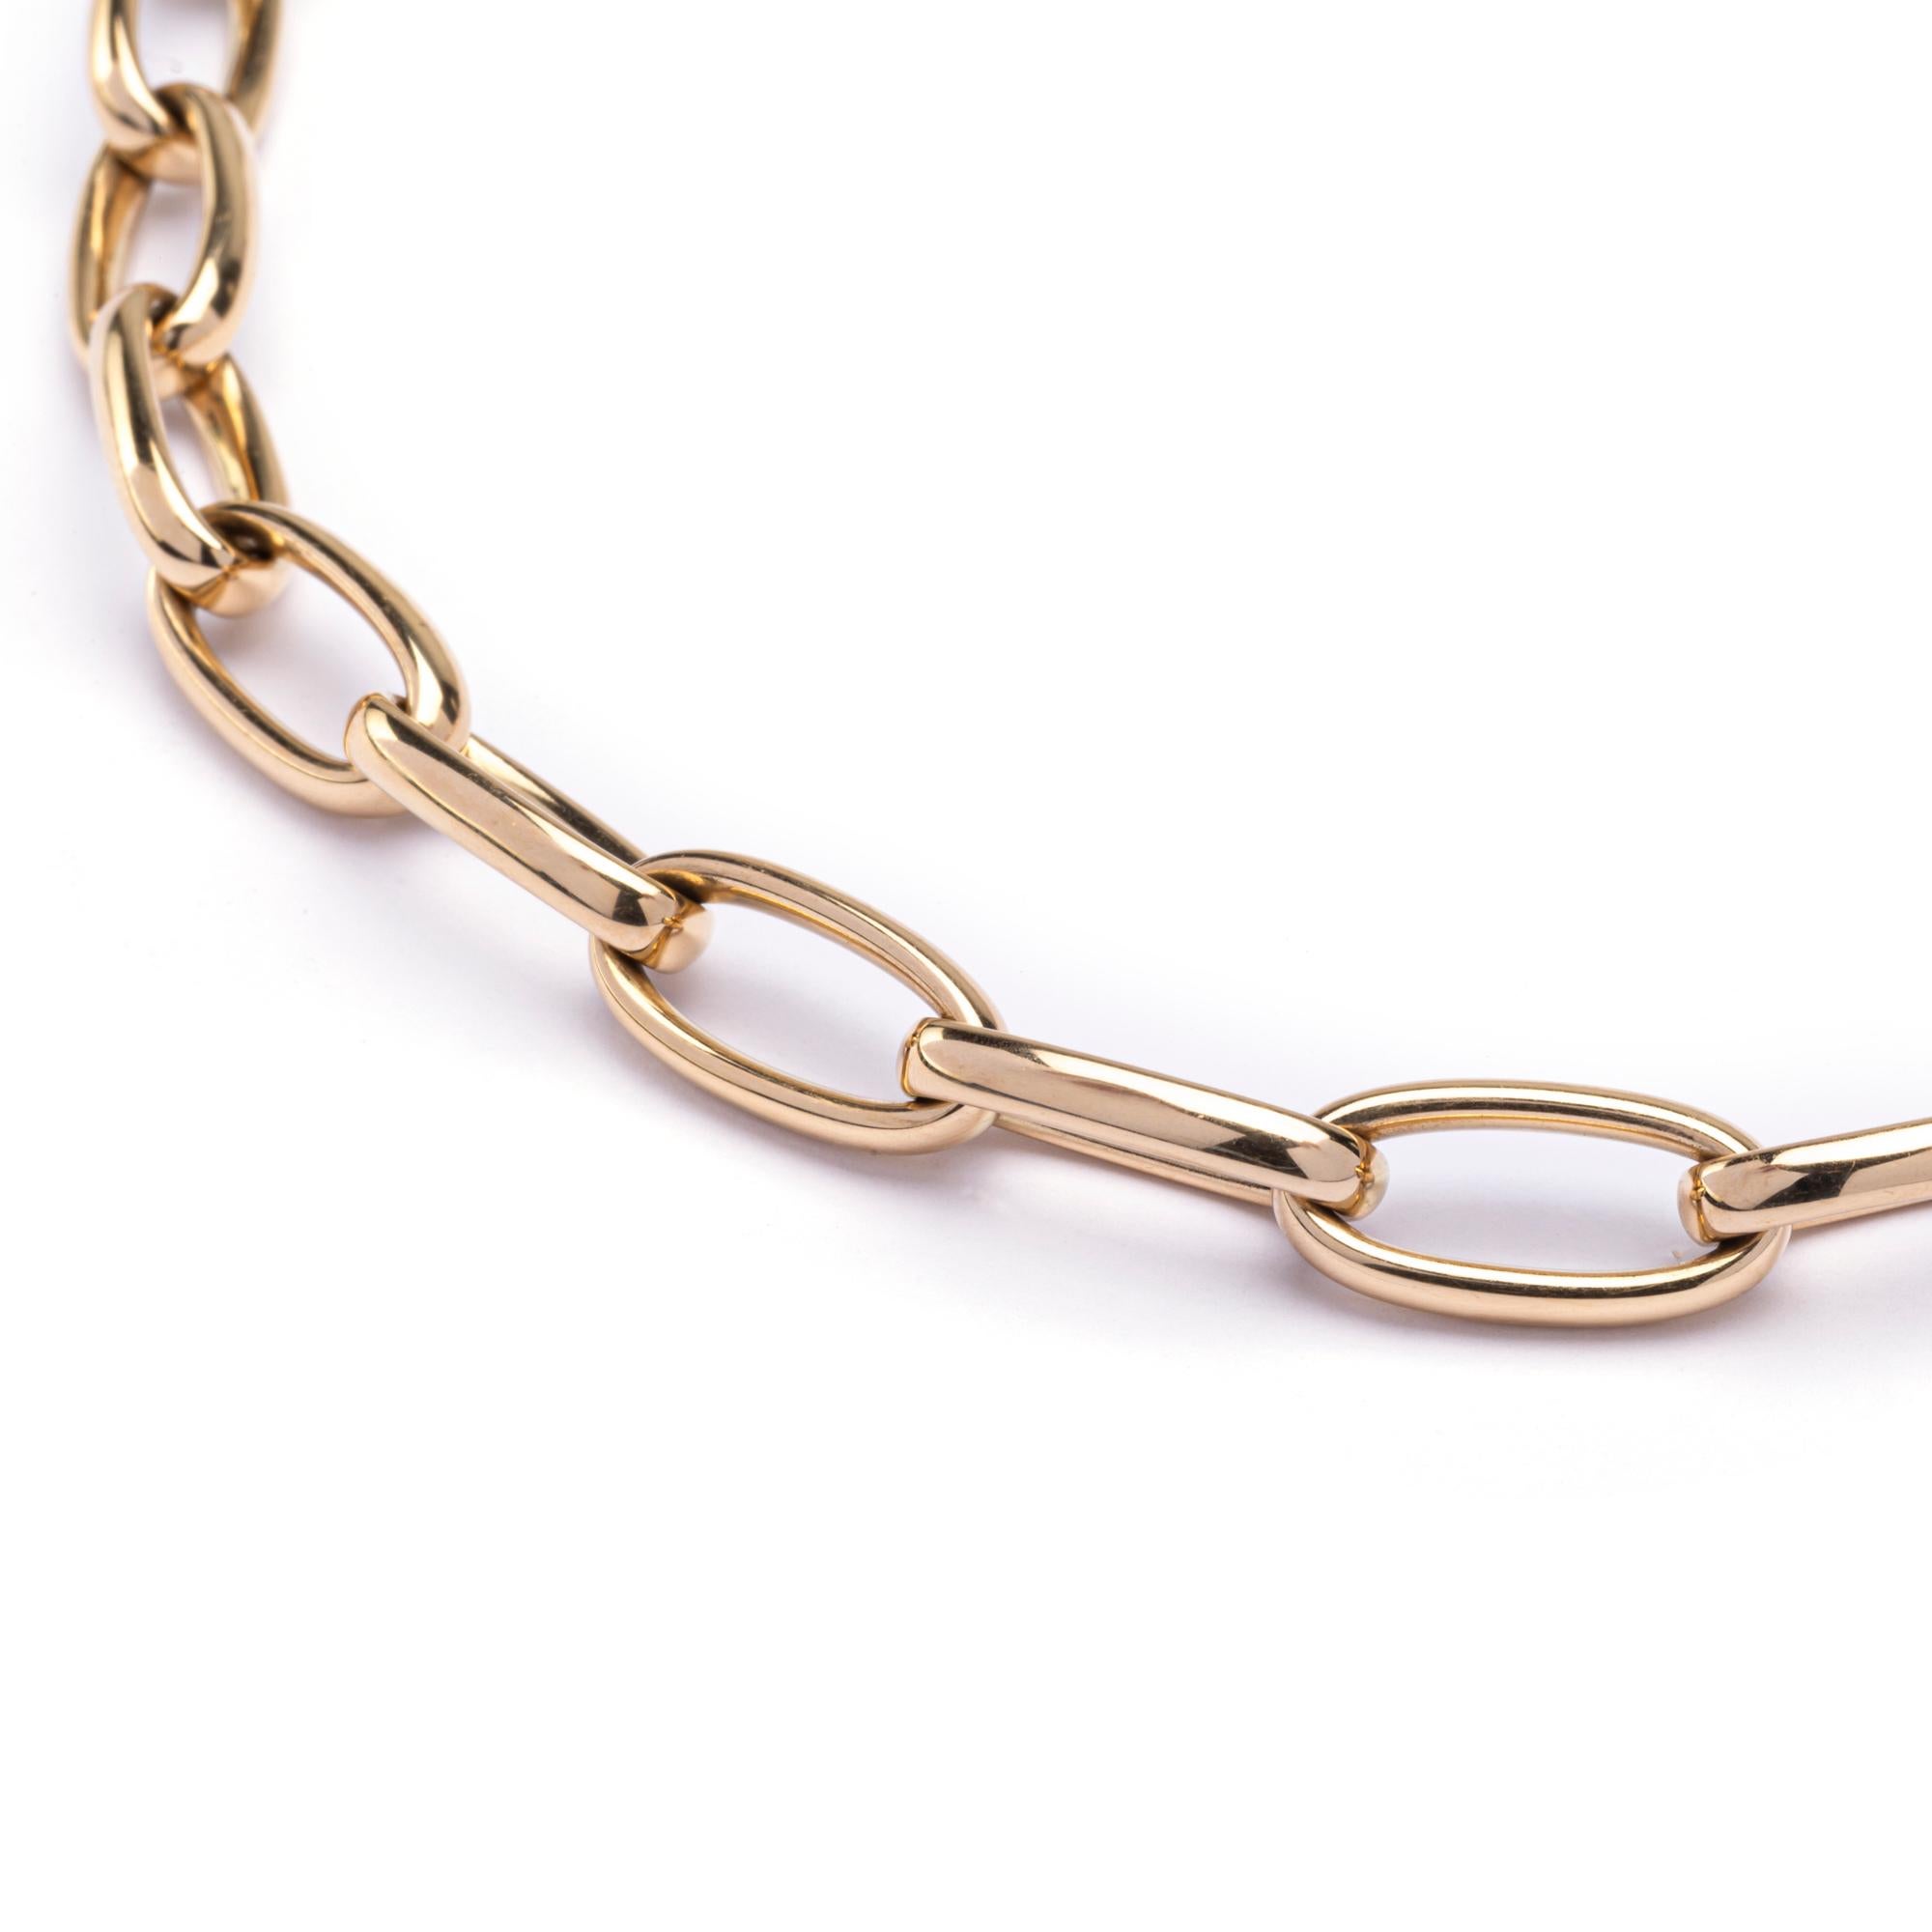 Alex Jona Design Collection, Hand crafted in Italy, 18 karat yellow gold link chain necklace. 
Dimension : L 16.73 in X W 0.36 in - L 42,5 cm X W 9.1 mm

Alex Jona jewels stand out, not only for their special design and for the excellent quality of